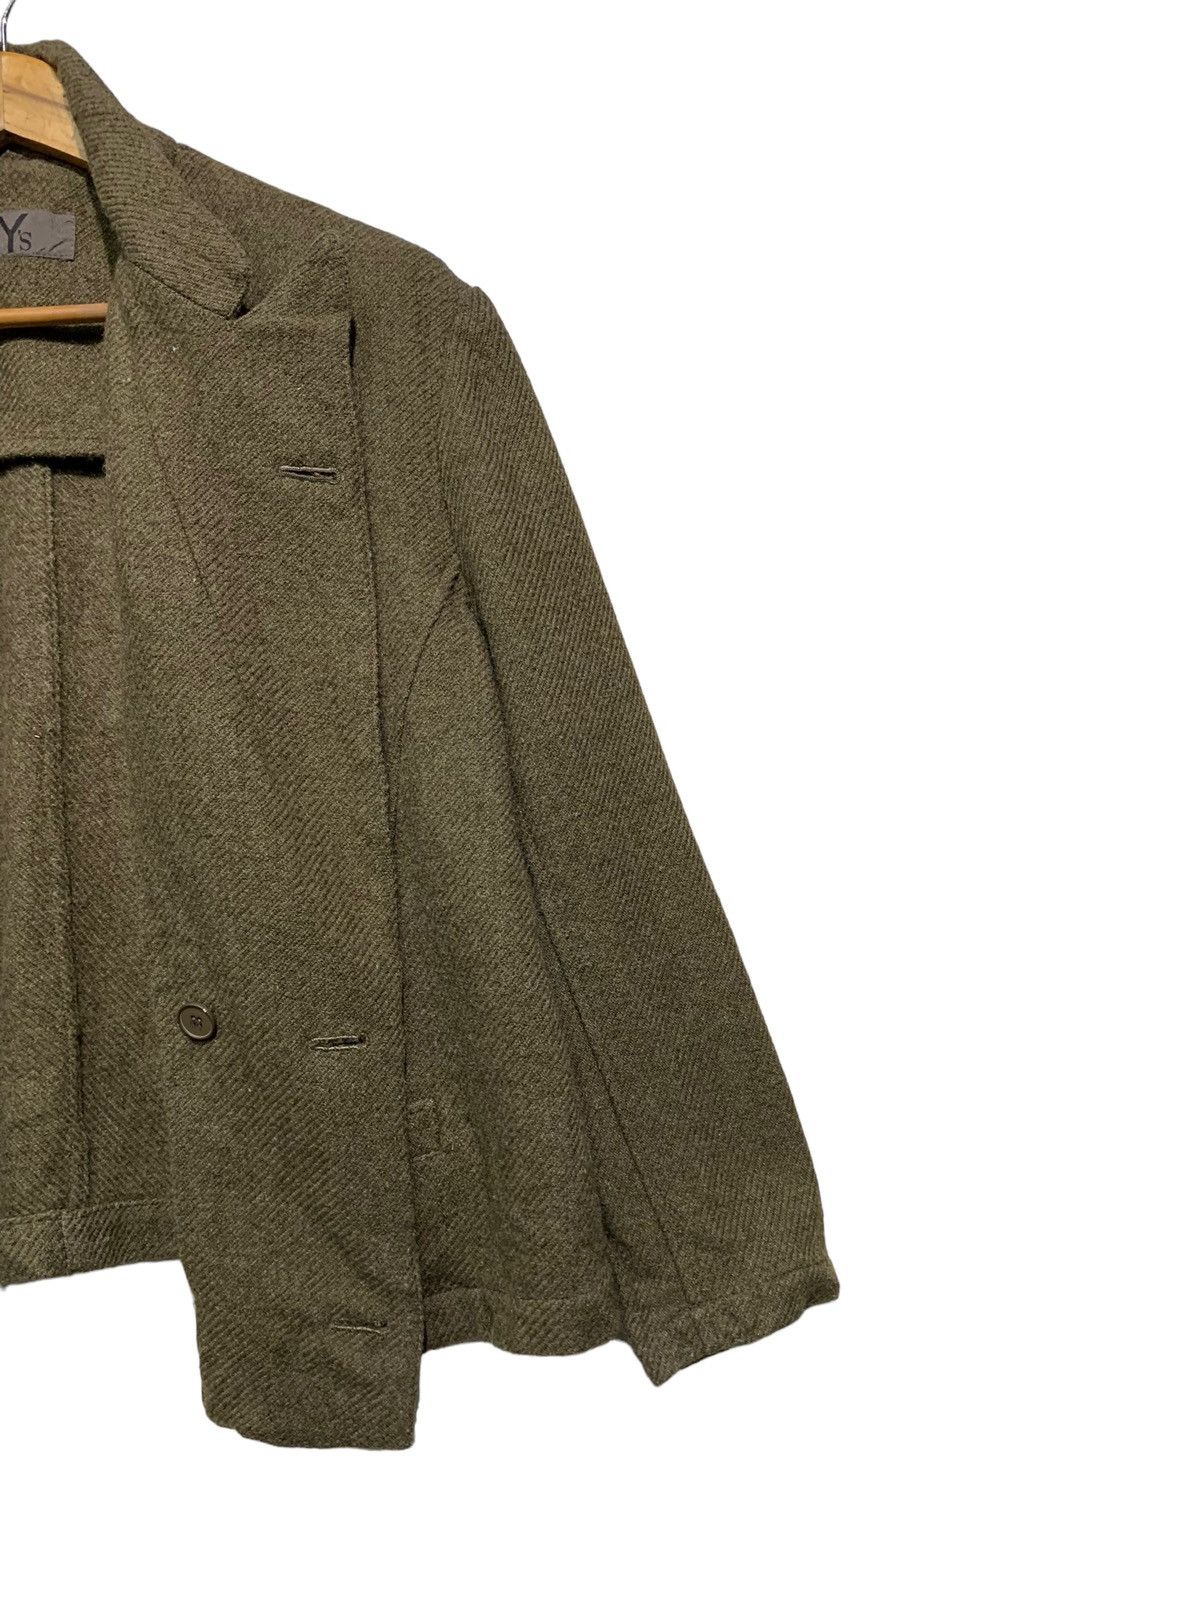 🔥Y’s WOOL DOUBLE BREAT JACKETS OLIVE GREEN - 3